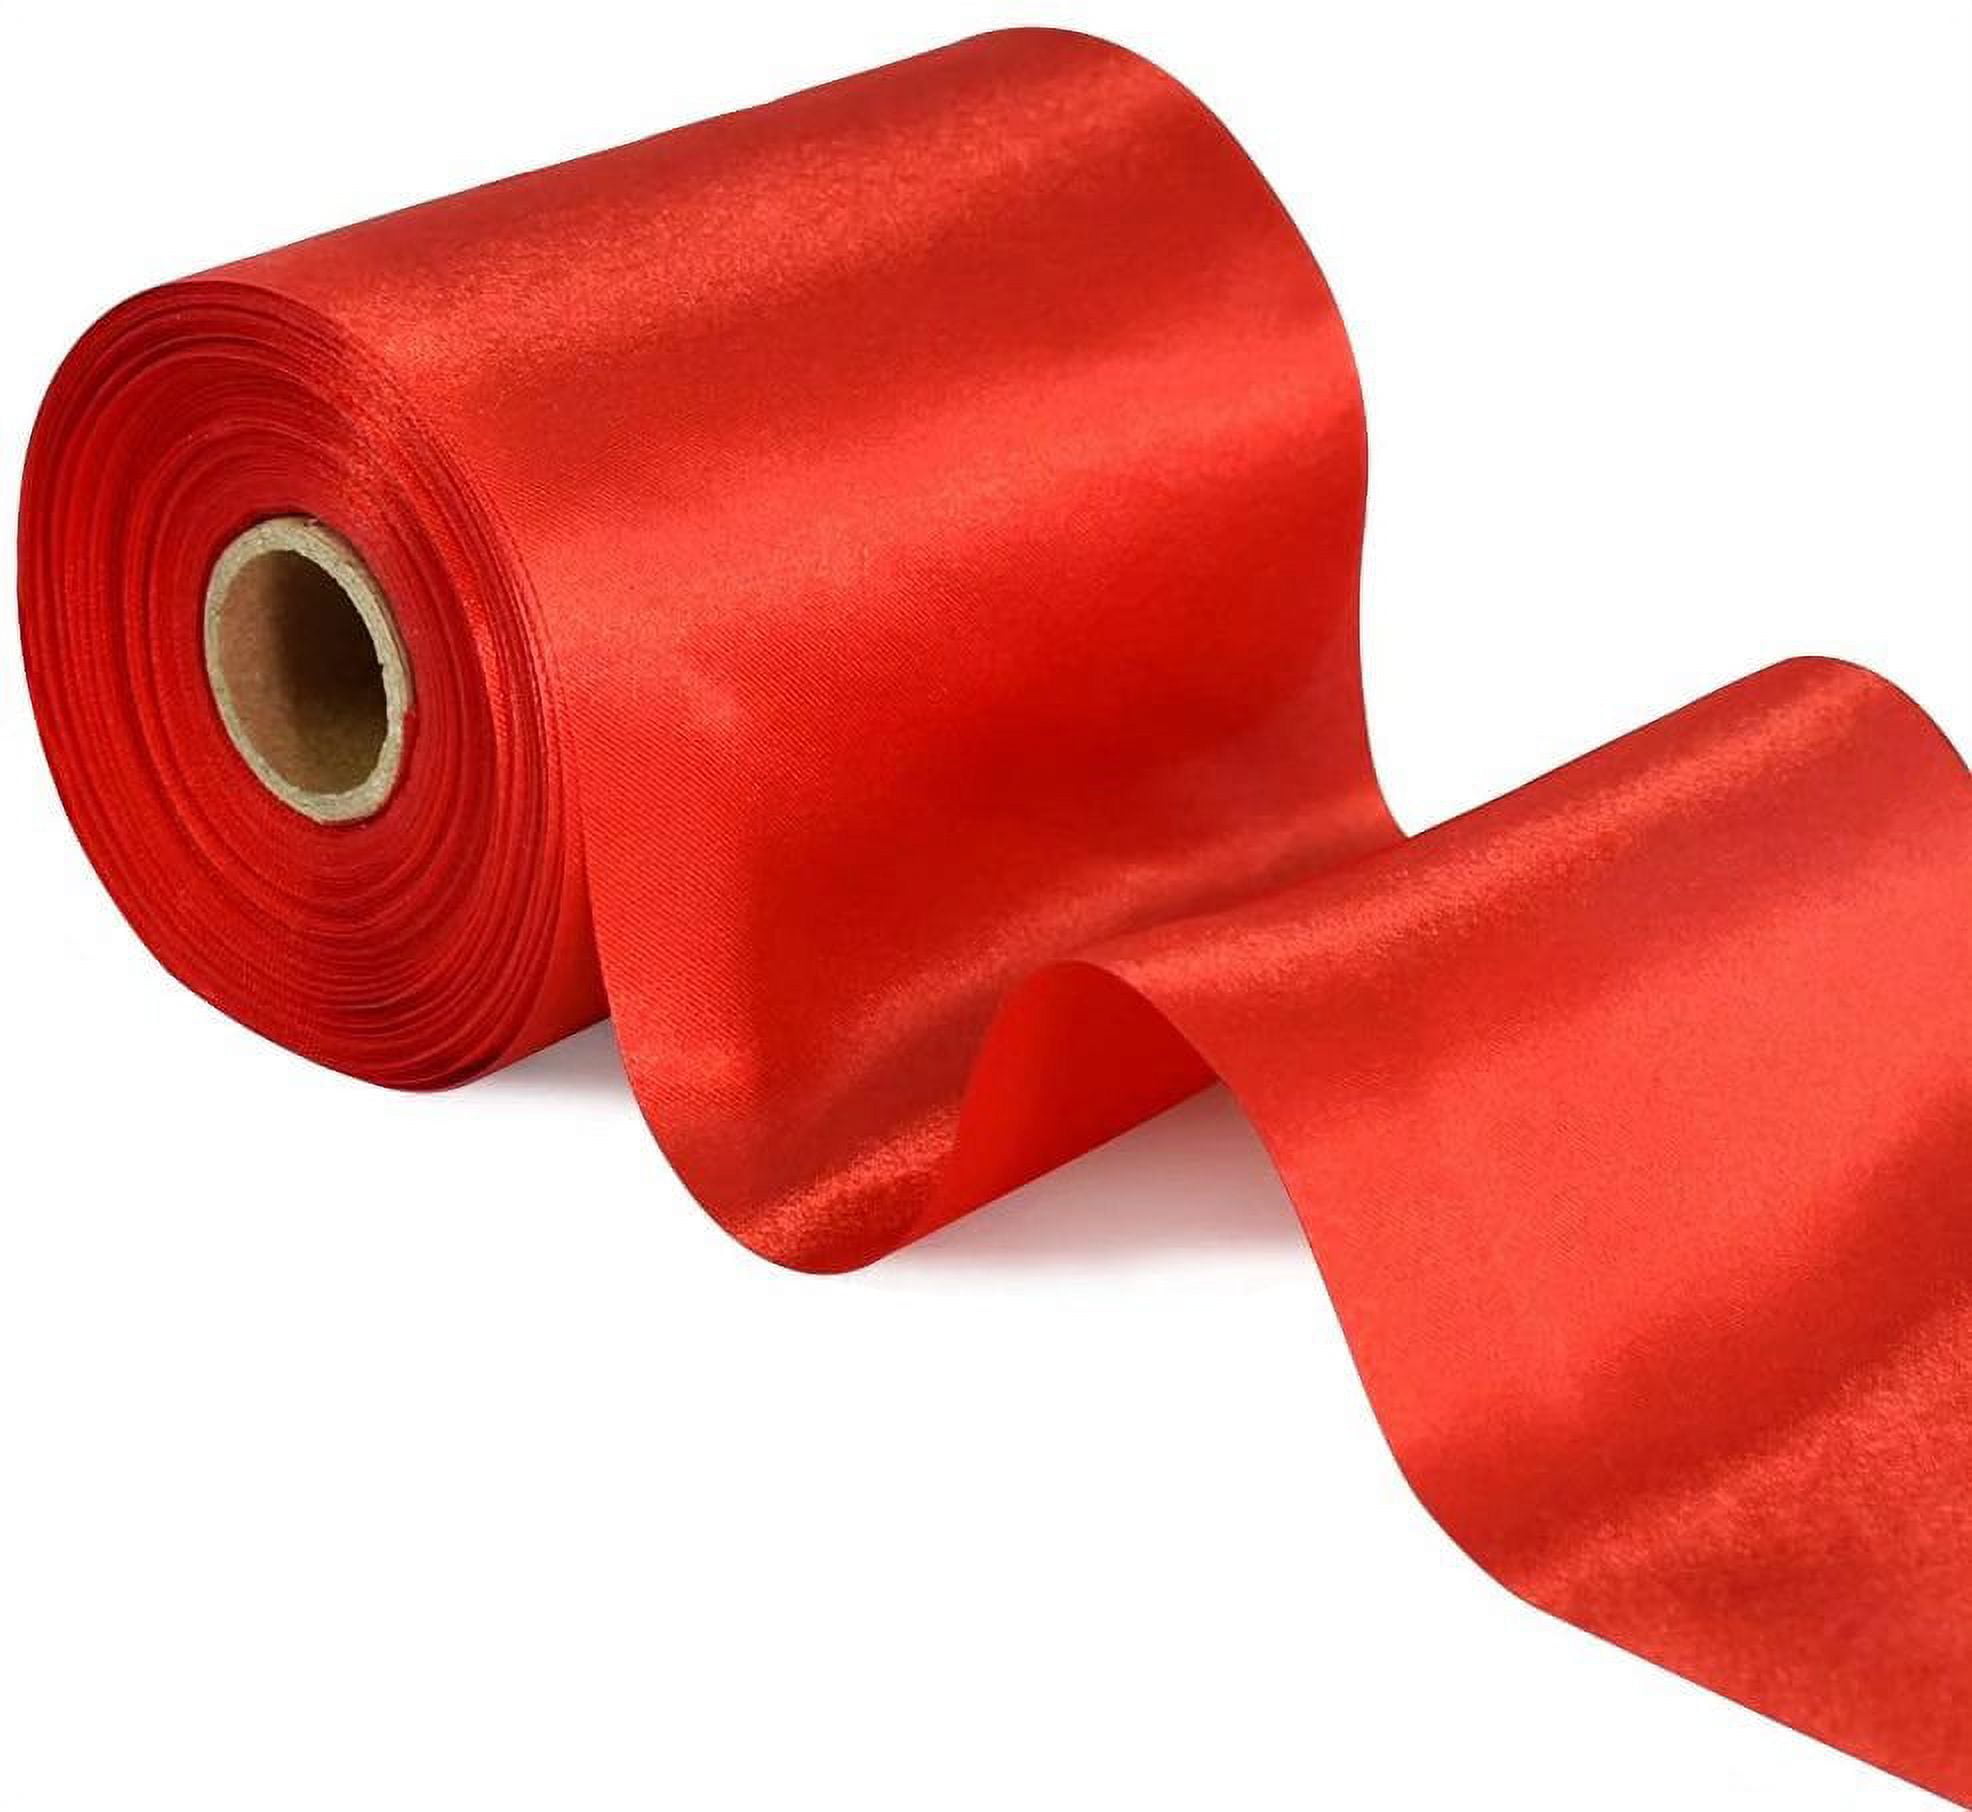 TONIFUL 4 Inch x 22Yards Wide Red Satin Ribbon Solid Fabric